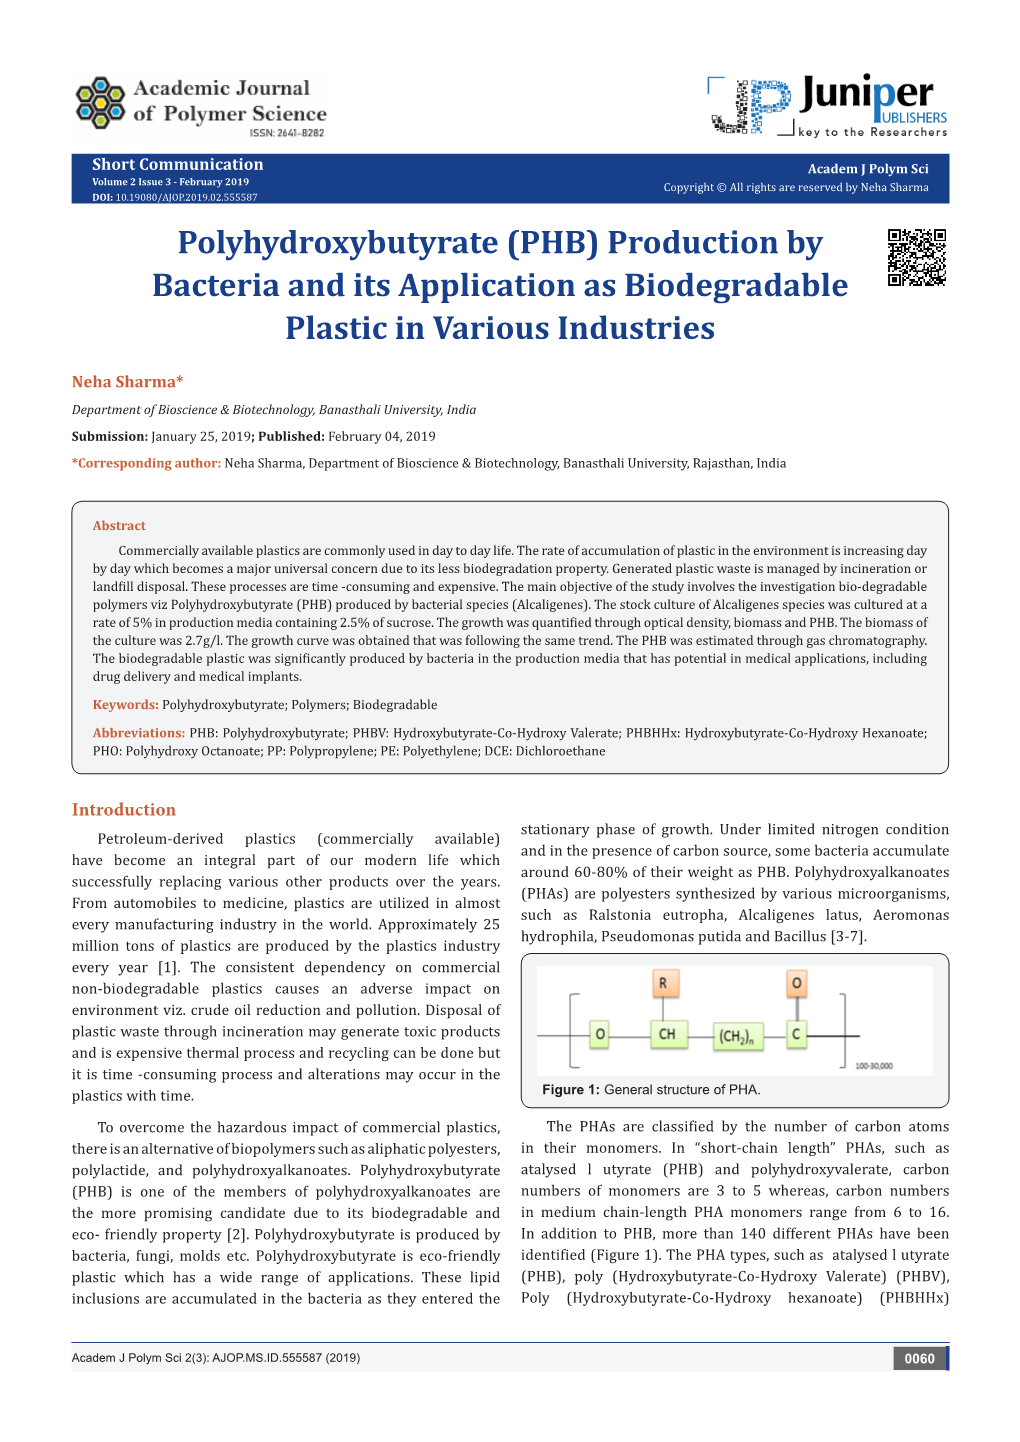 Polyhydroxybutyrate (PHB) Production by Bacteria and Its Application As Biodegradable Plastic in Various Industries